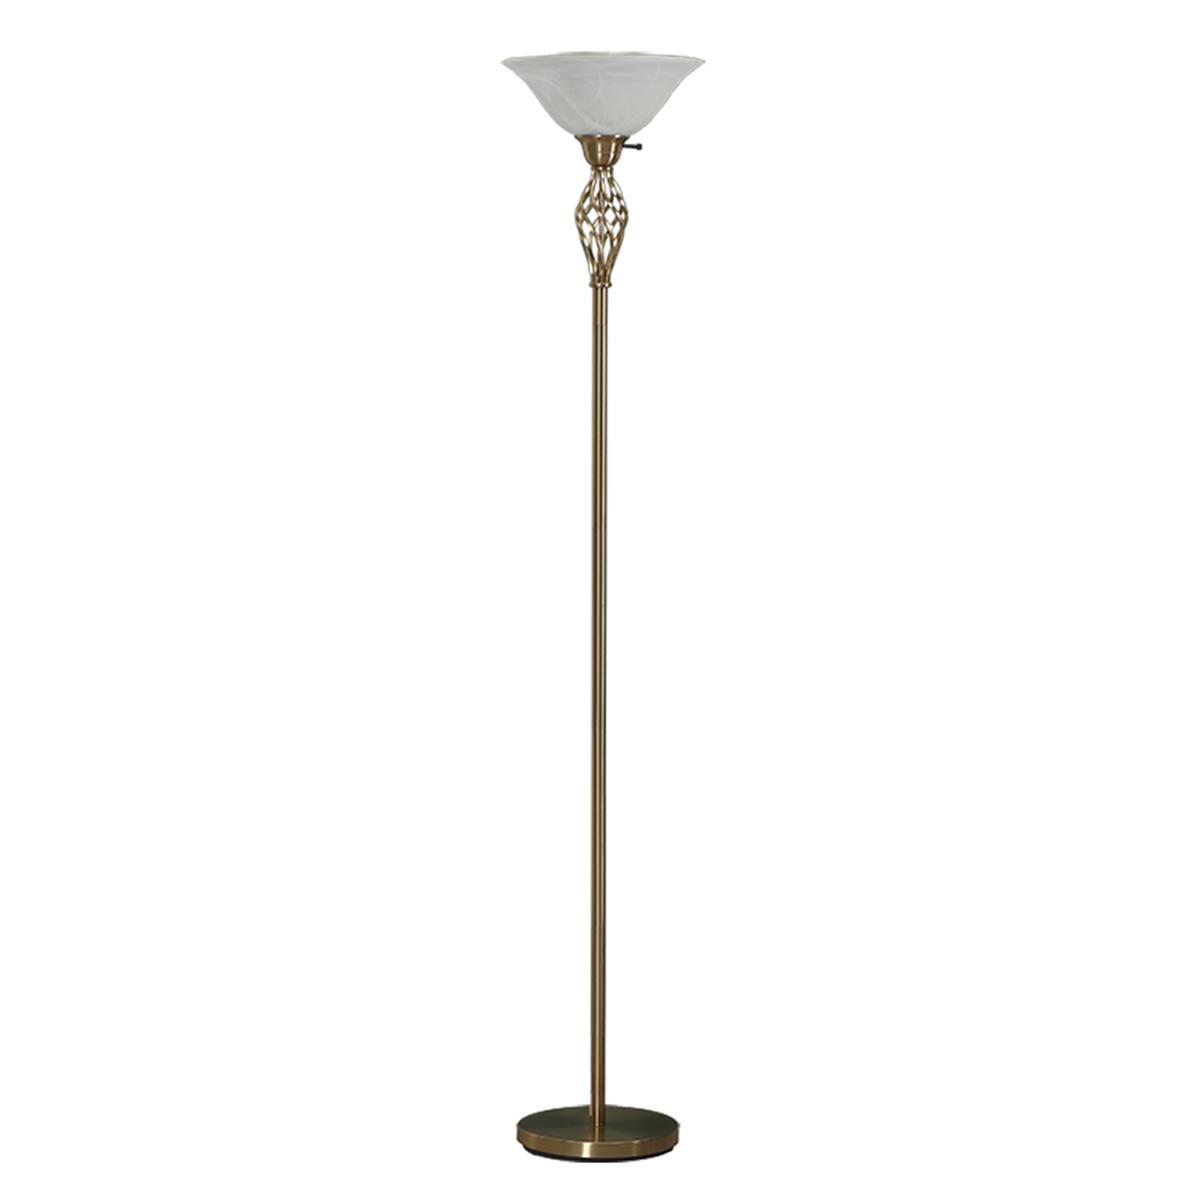 Vintage Gold Floor Lamp,3 Way Dimmable | GL-FLM050 Featured Image